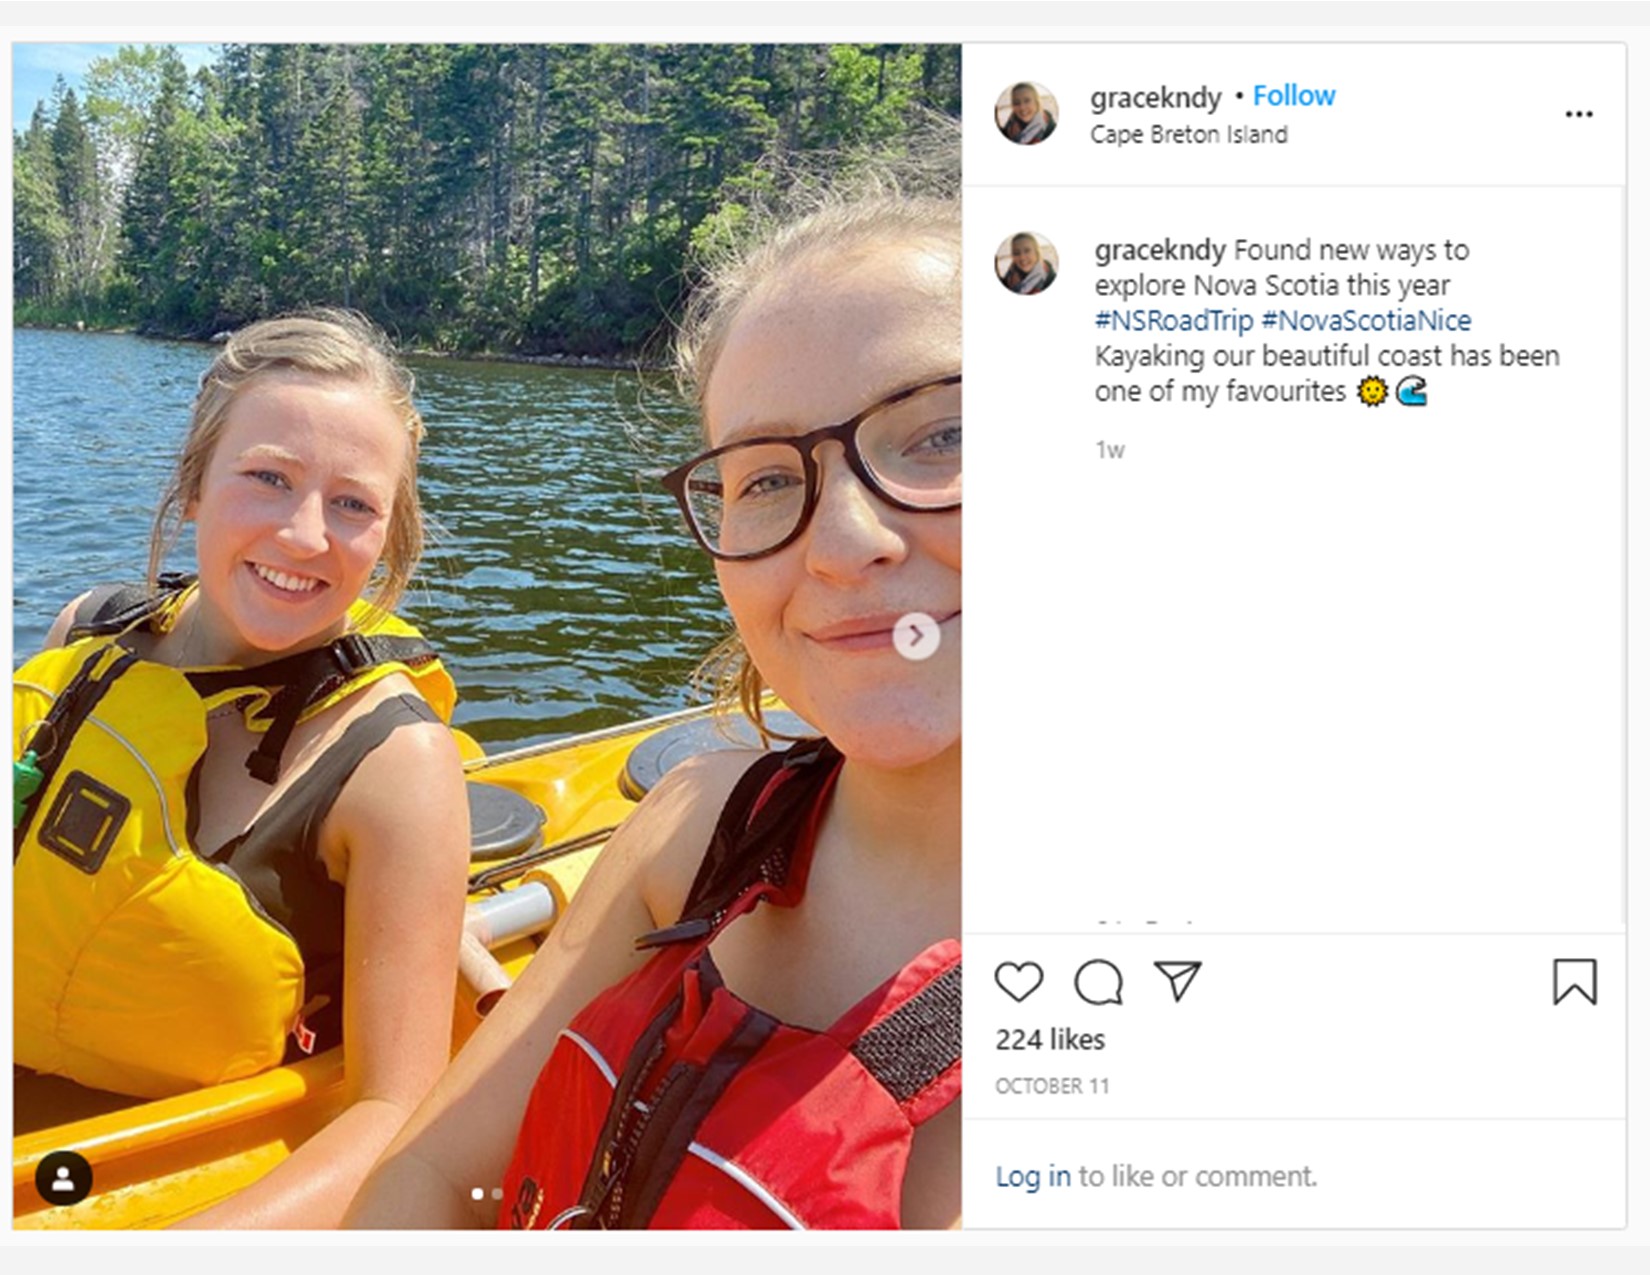 Grace Kennedy selfie while kayaking posted on instagram